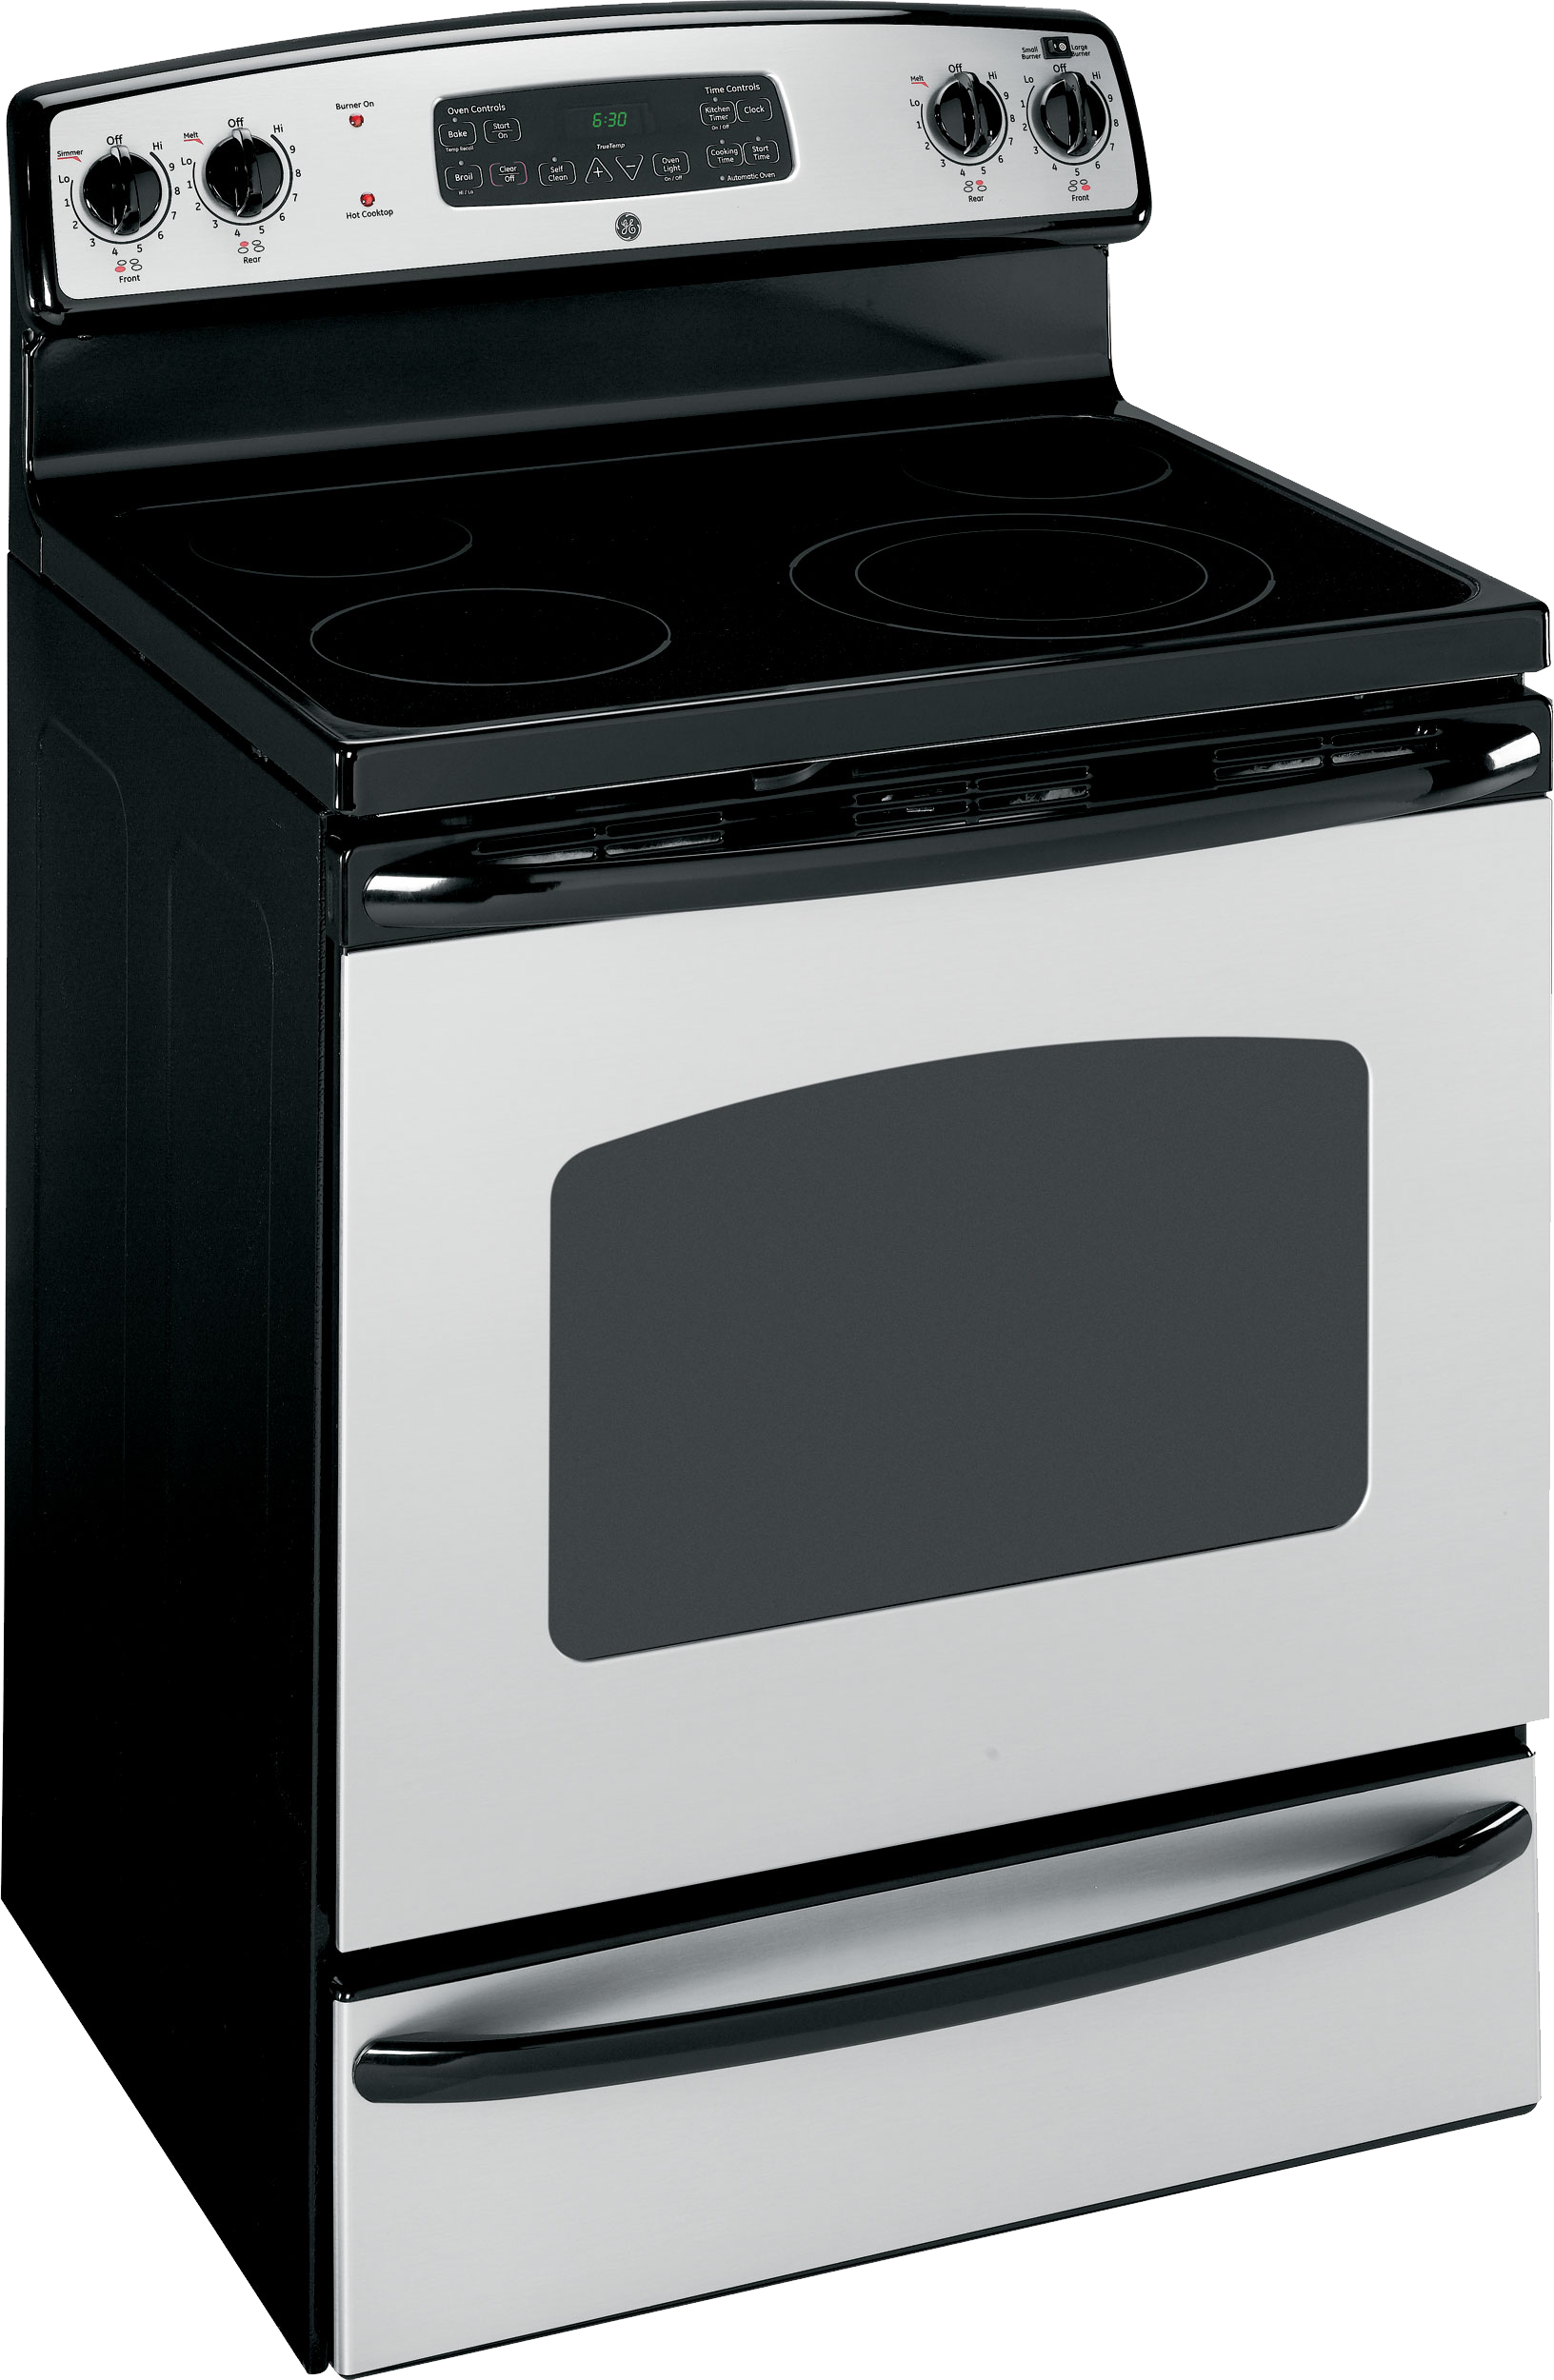 Stove Picture Png Picpng